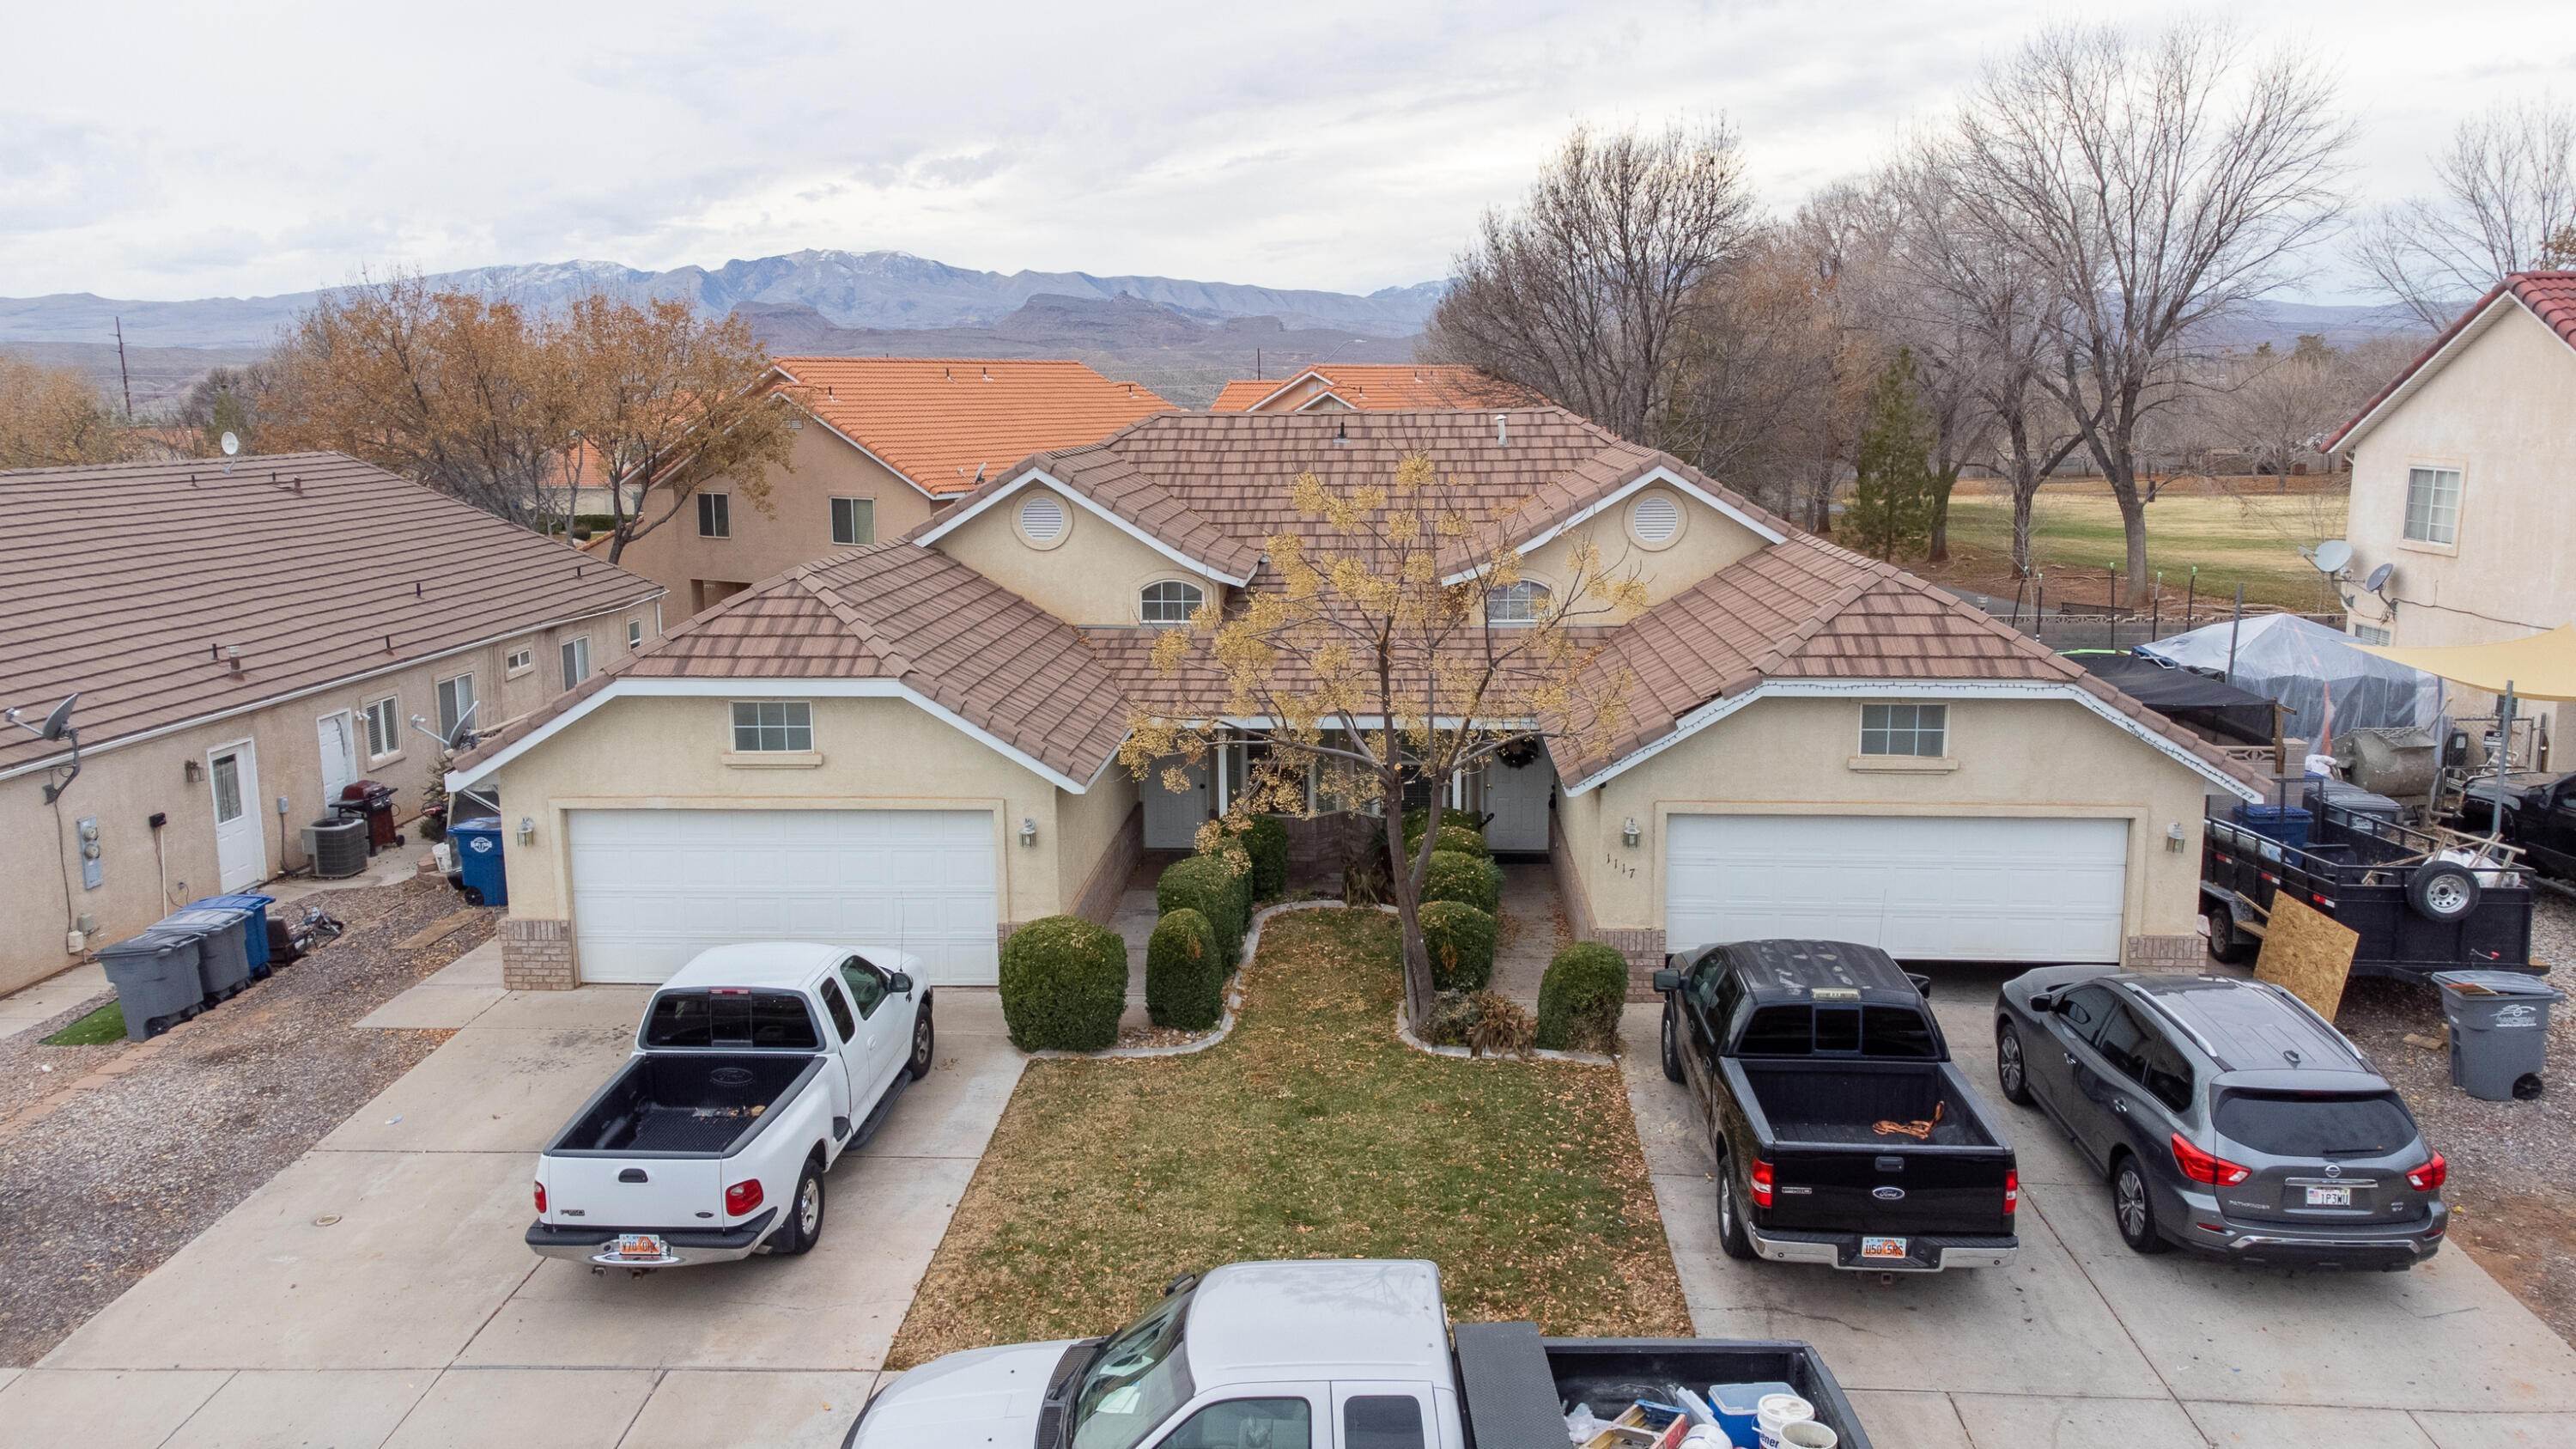 Multi-Family Homes for Sale at 1117 1650 Street St. George, Utah 84770 United States